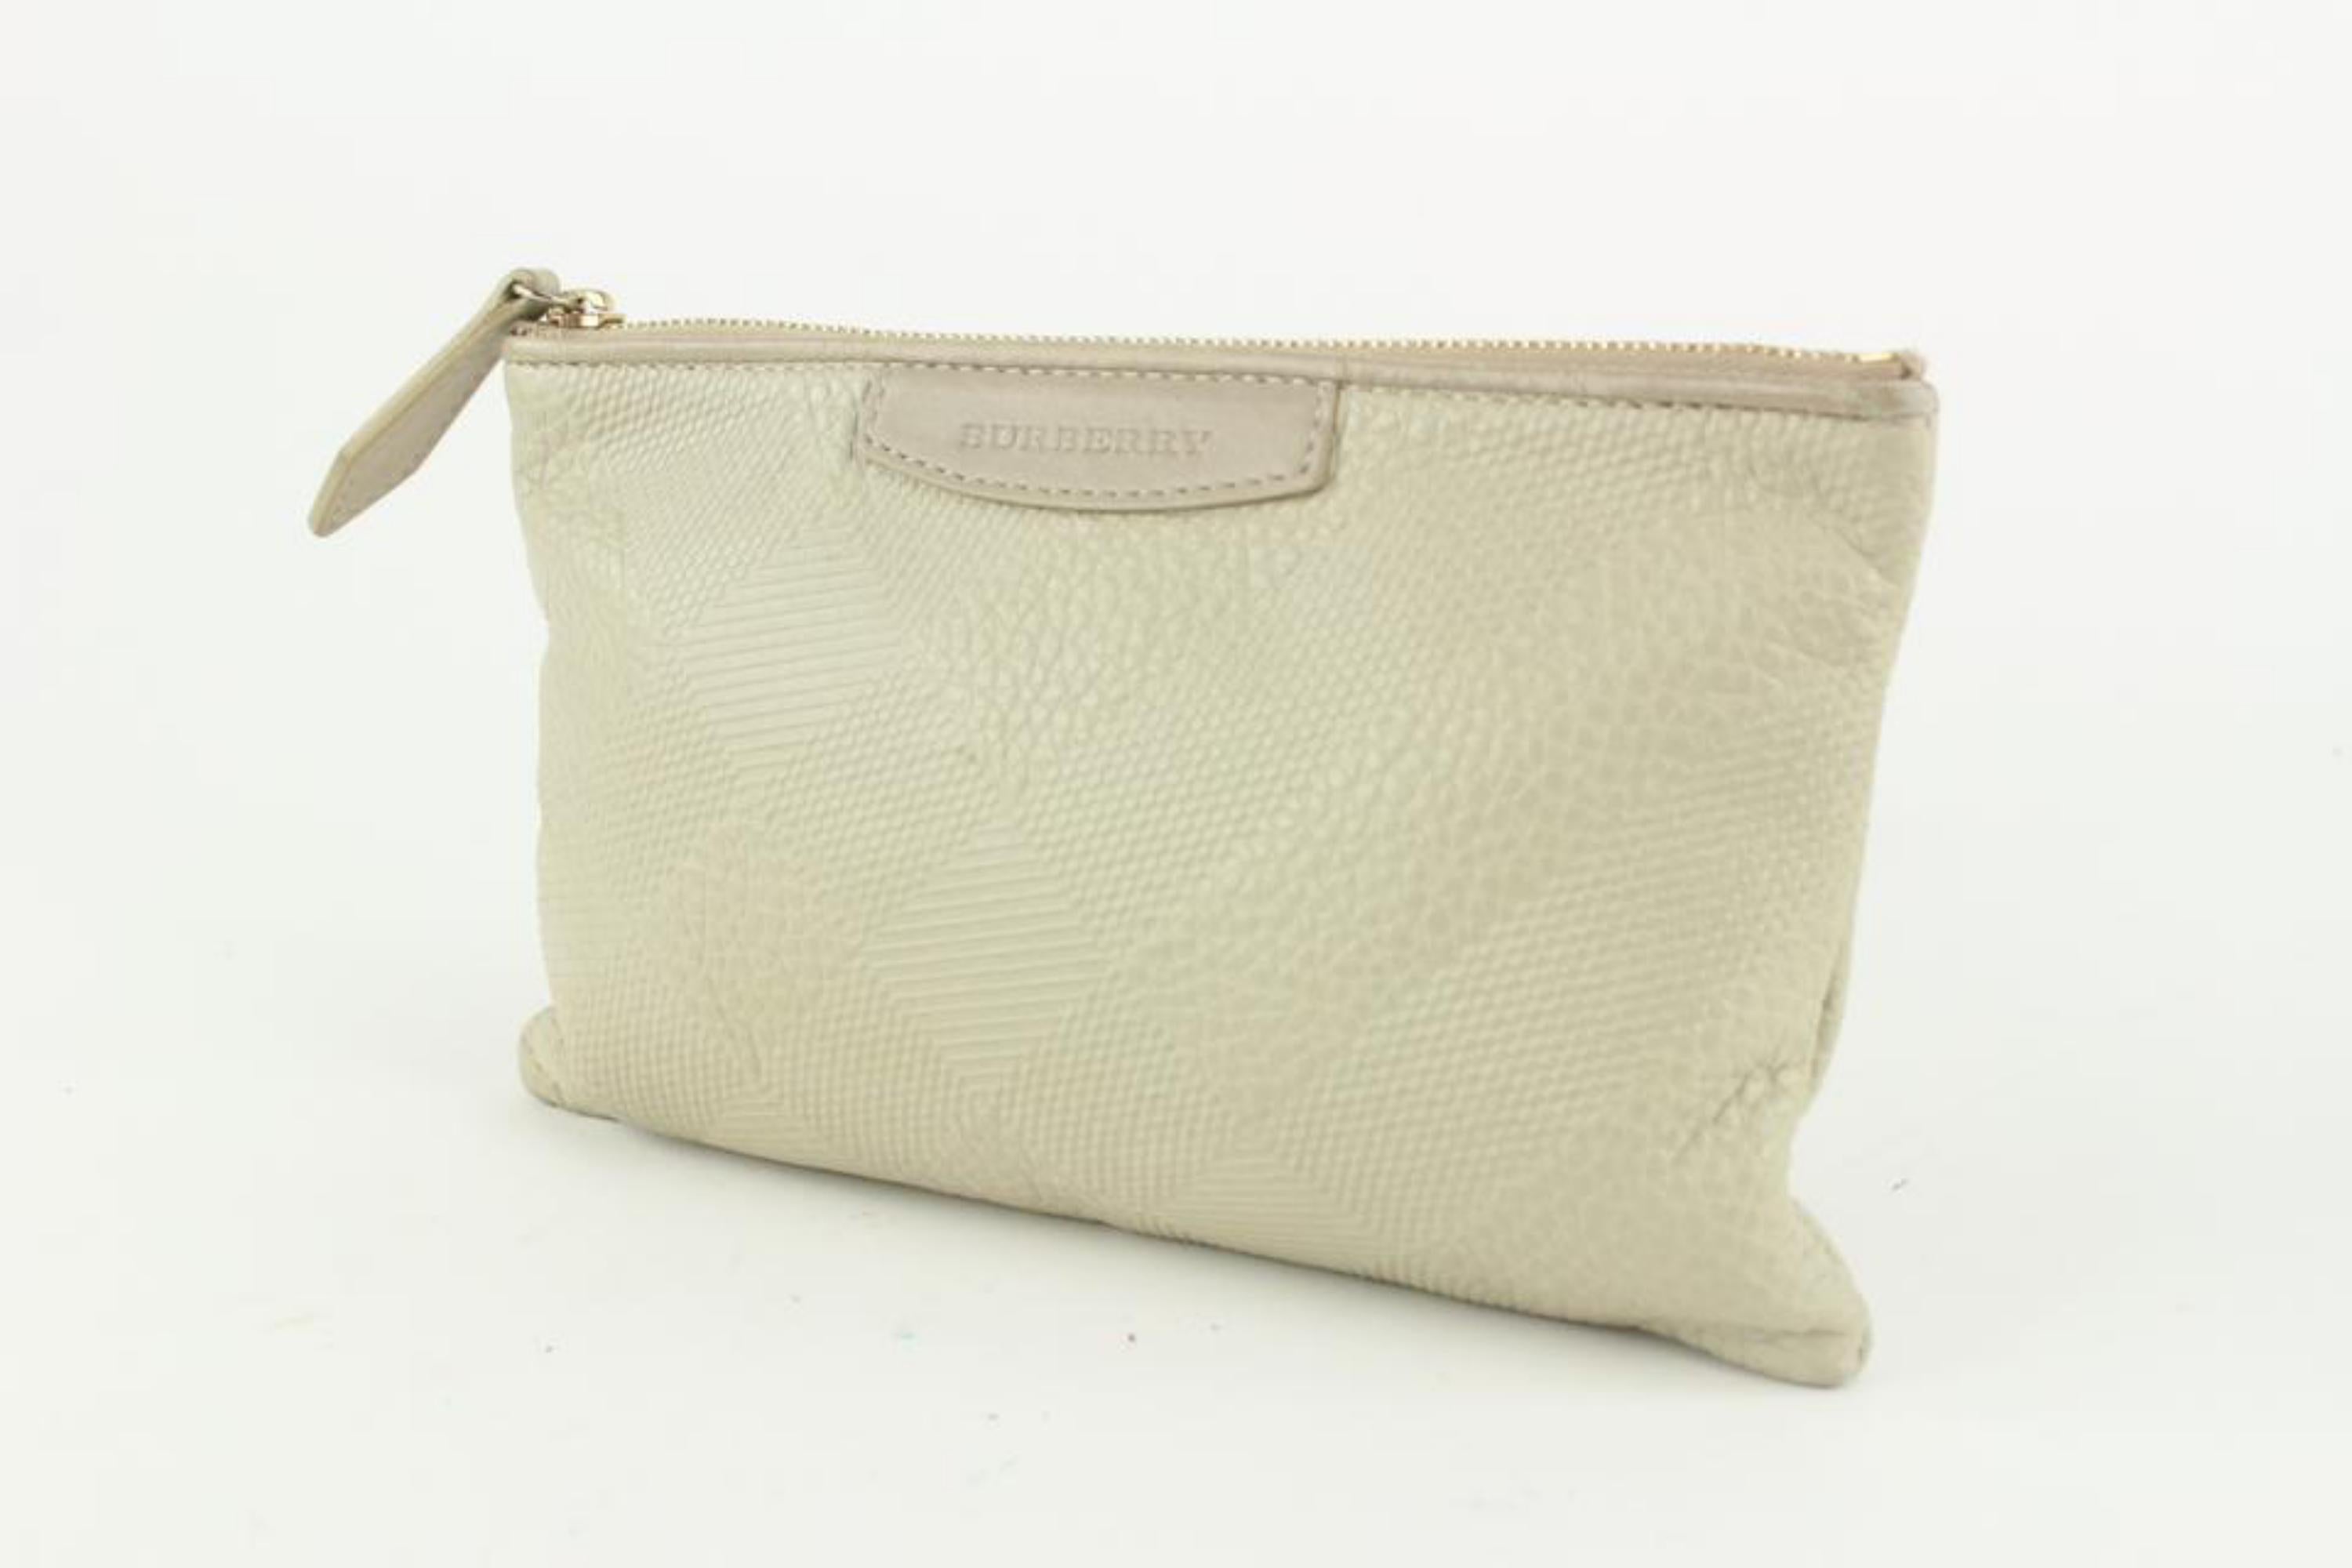 Burberry Ivory Check Embossed Toiletry Cosmetic Pouch 1220b46
Date Code/Serial Number: ITALBSRL239CAL
Made In: Italy
Measurements: Length:  8